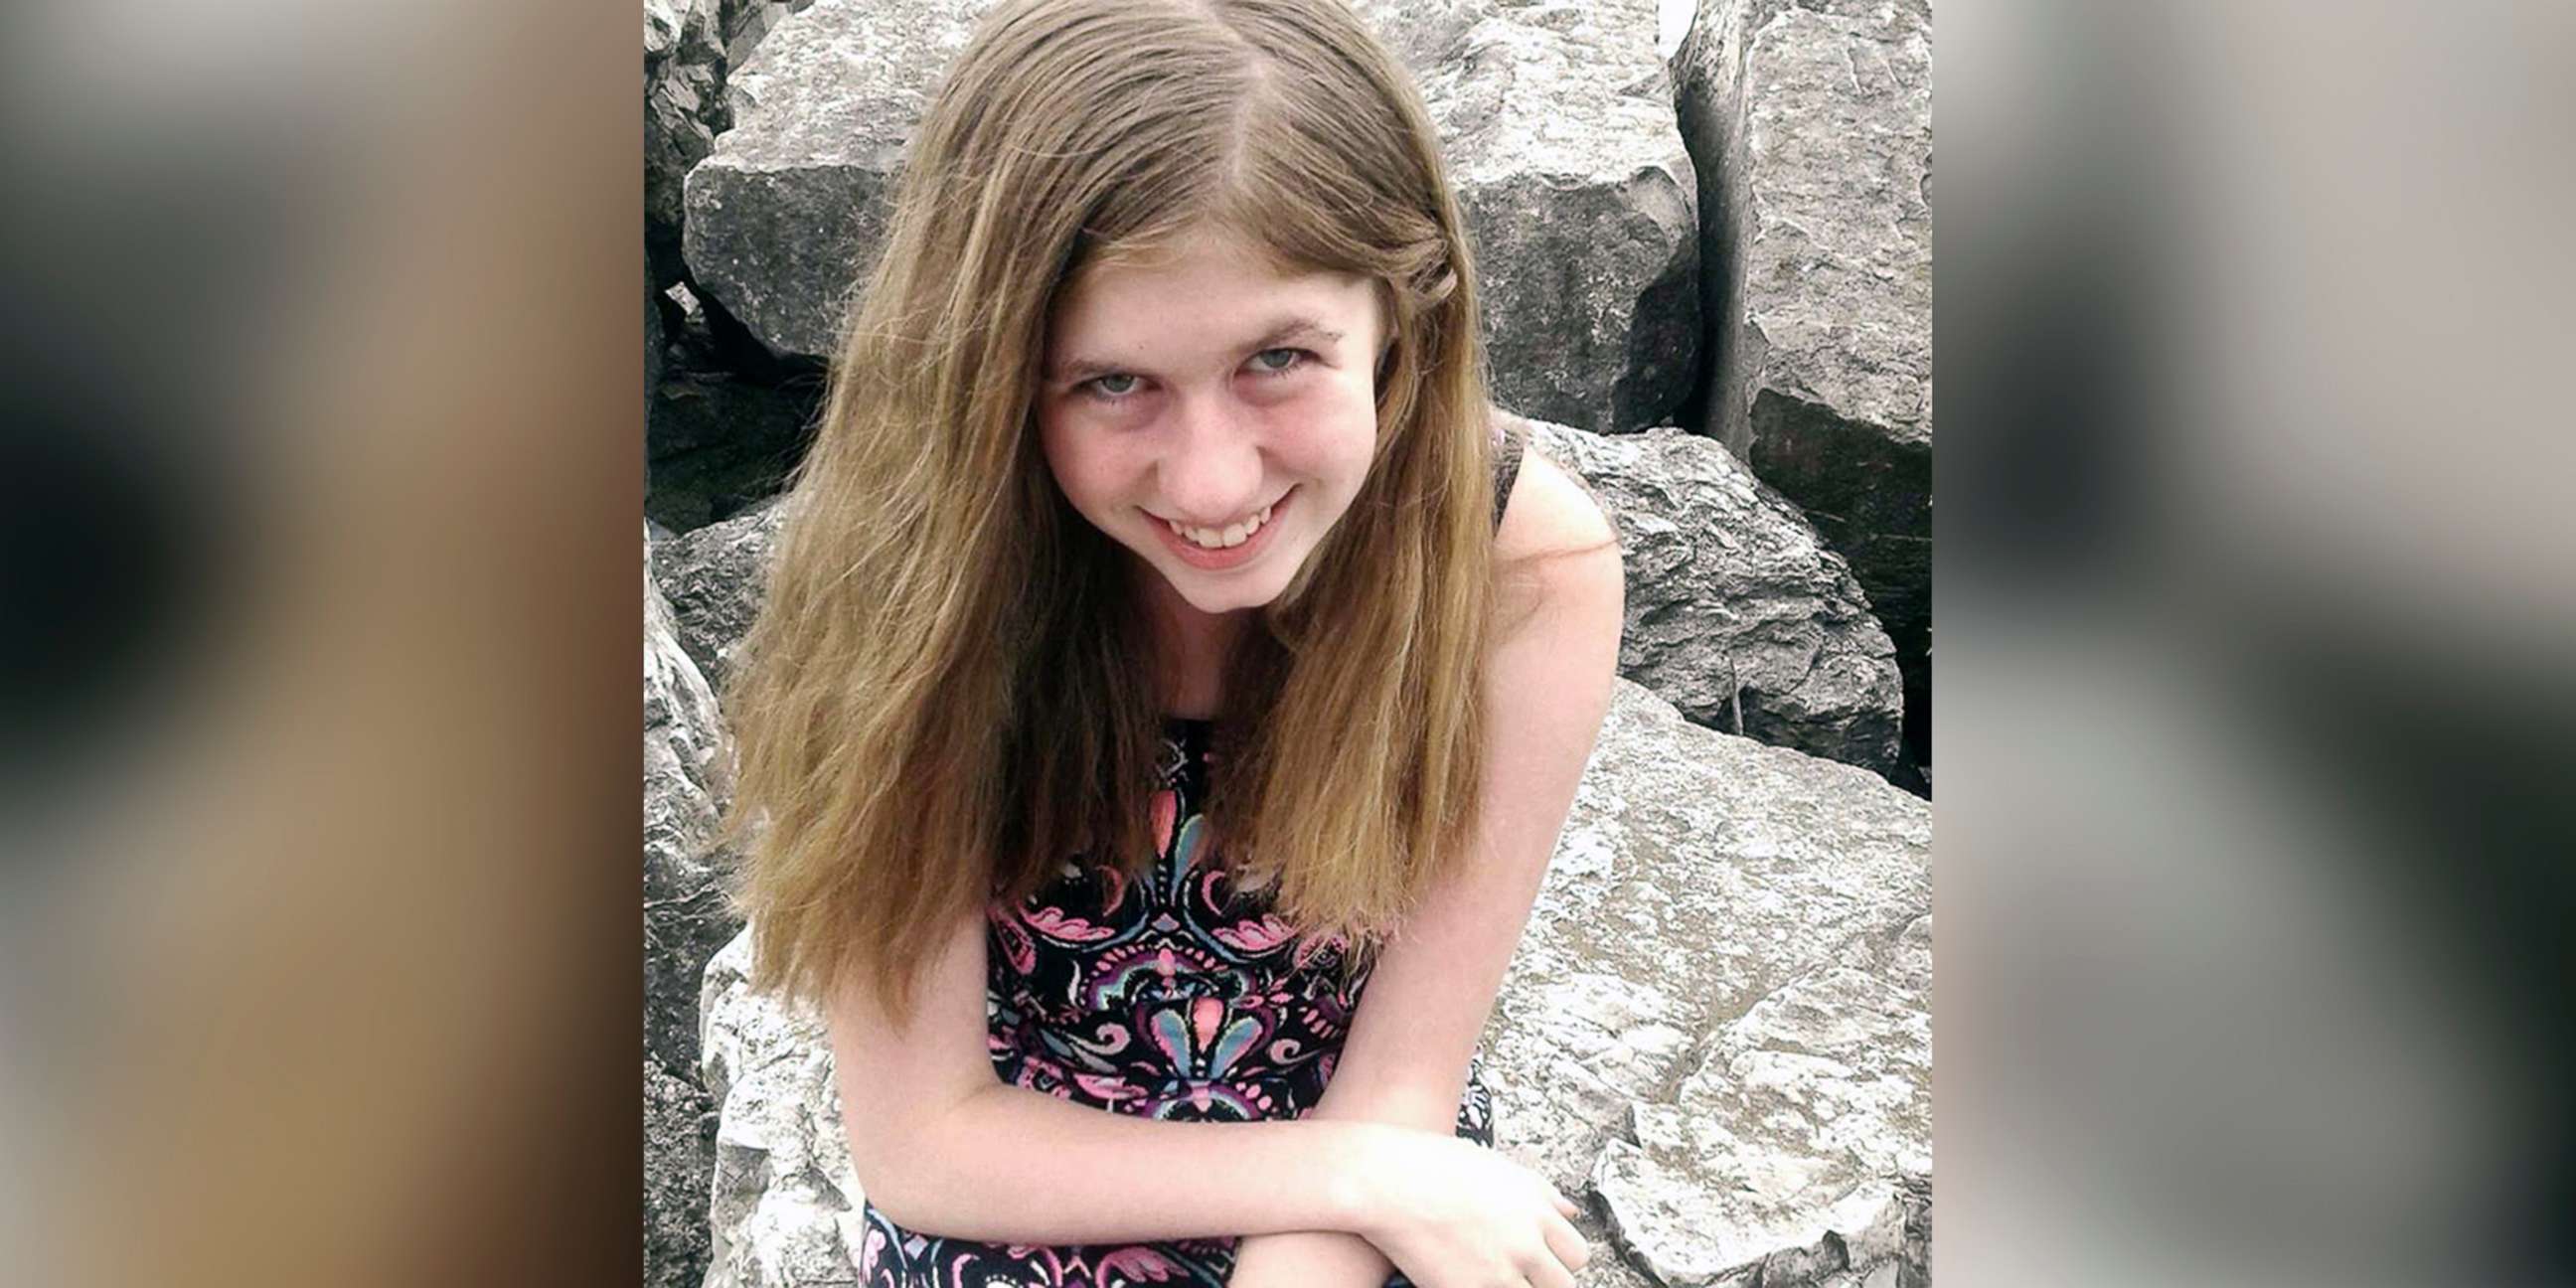 PHOTO: Jayme Closs in an undated photo provided by Barron County, Wis., Sheriff's Department. Closs, a missing teenage girl, could be in danger after two adults were found dead at a home in Barron, Wis., on Oct. 15, 2018.